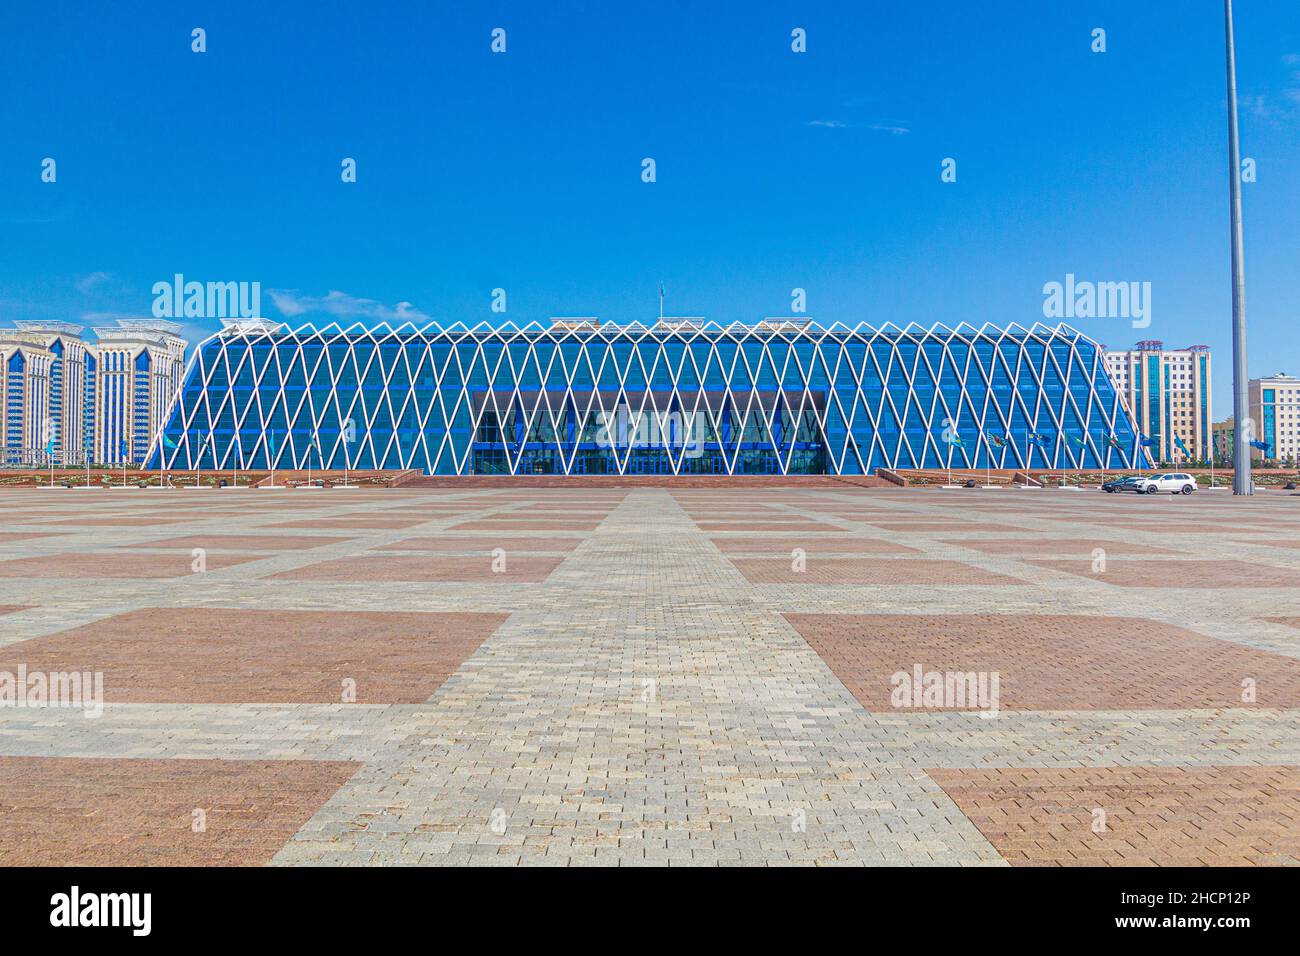 ASTANA, KAZAKHSTAN - JULY 9, 2018: Palace of Independence on the Independence Square in Astana now Nur-Sultan , capital of Kazakhstan. Stock Photo